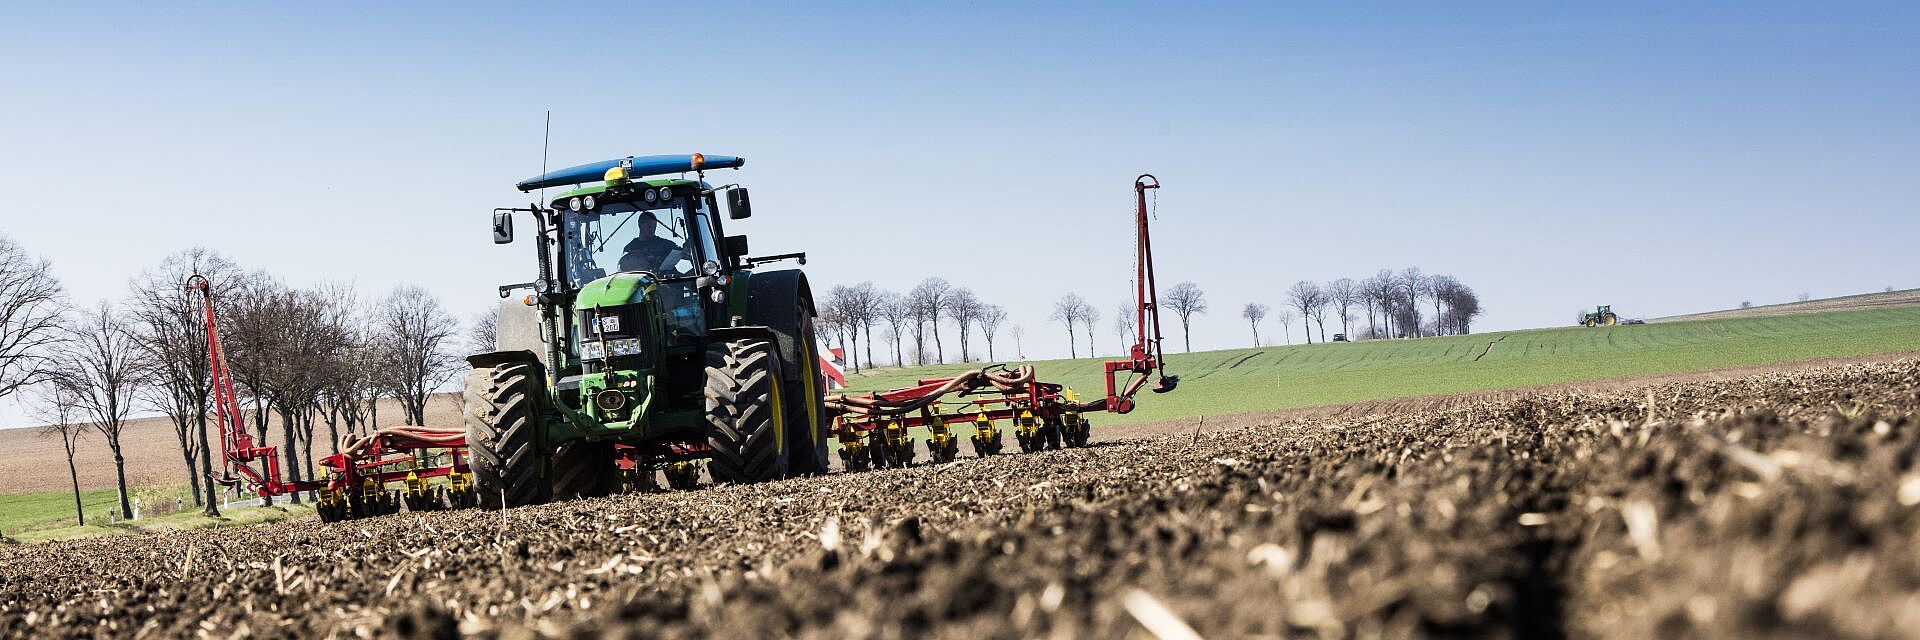 Strube - Sowing of sugar beets